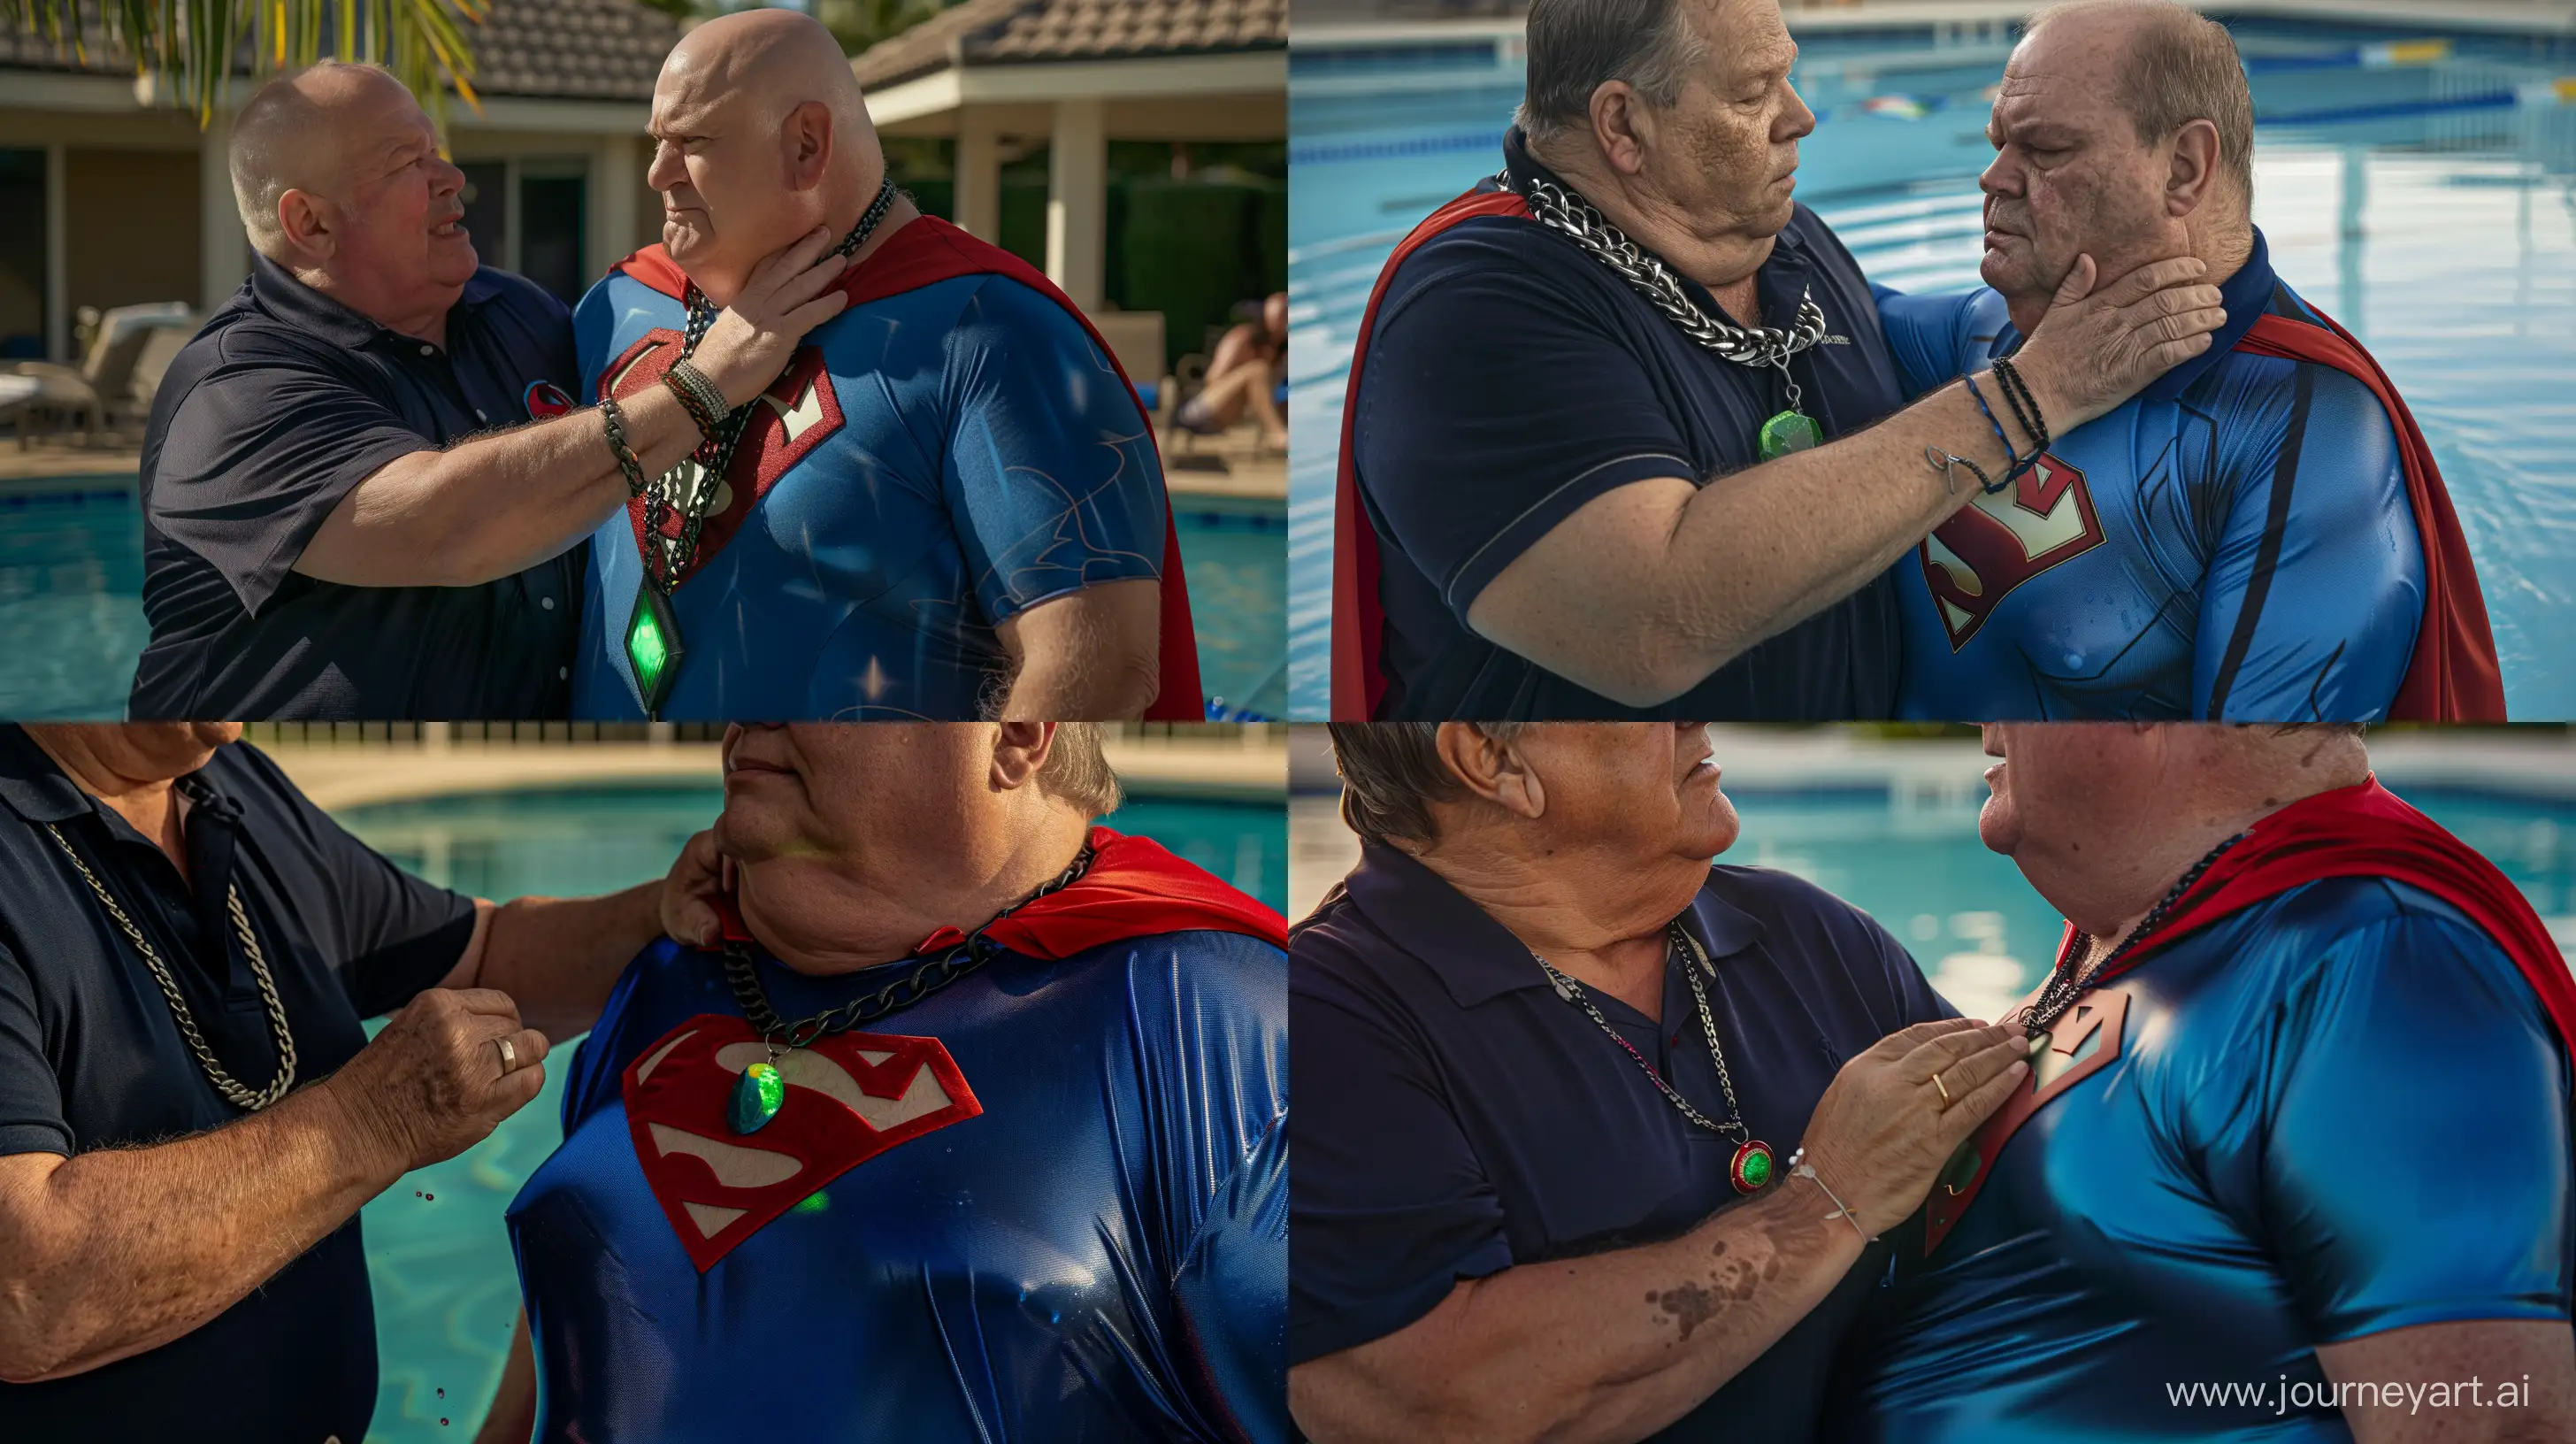 Elderly-Friends-Bonding-by-the-Poolside-Silky-Navy-Polo-and-Superman-Costume-Duo